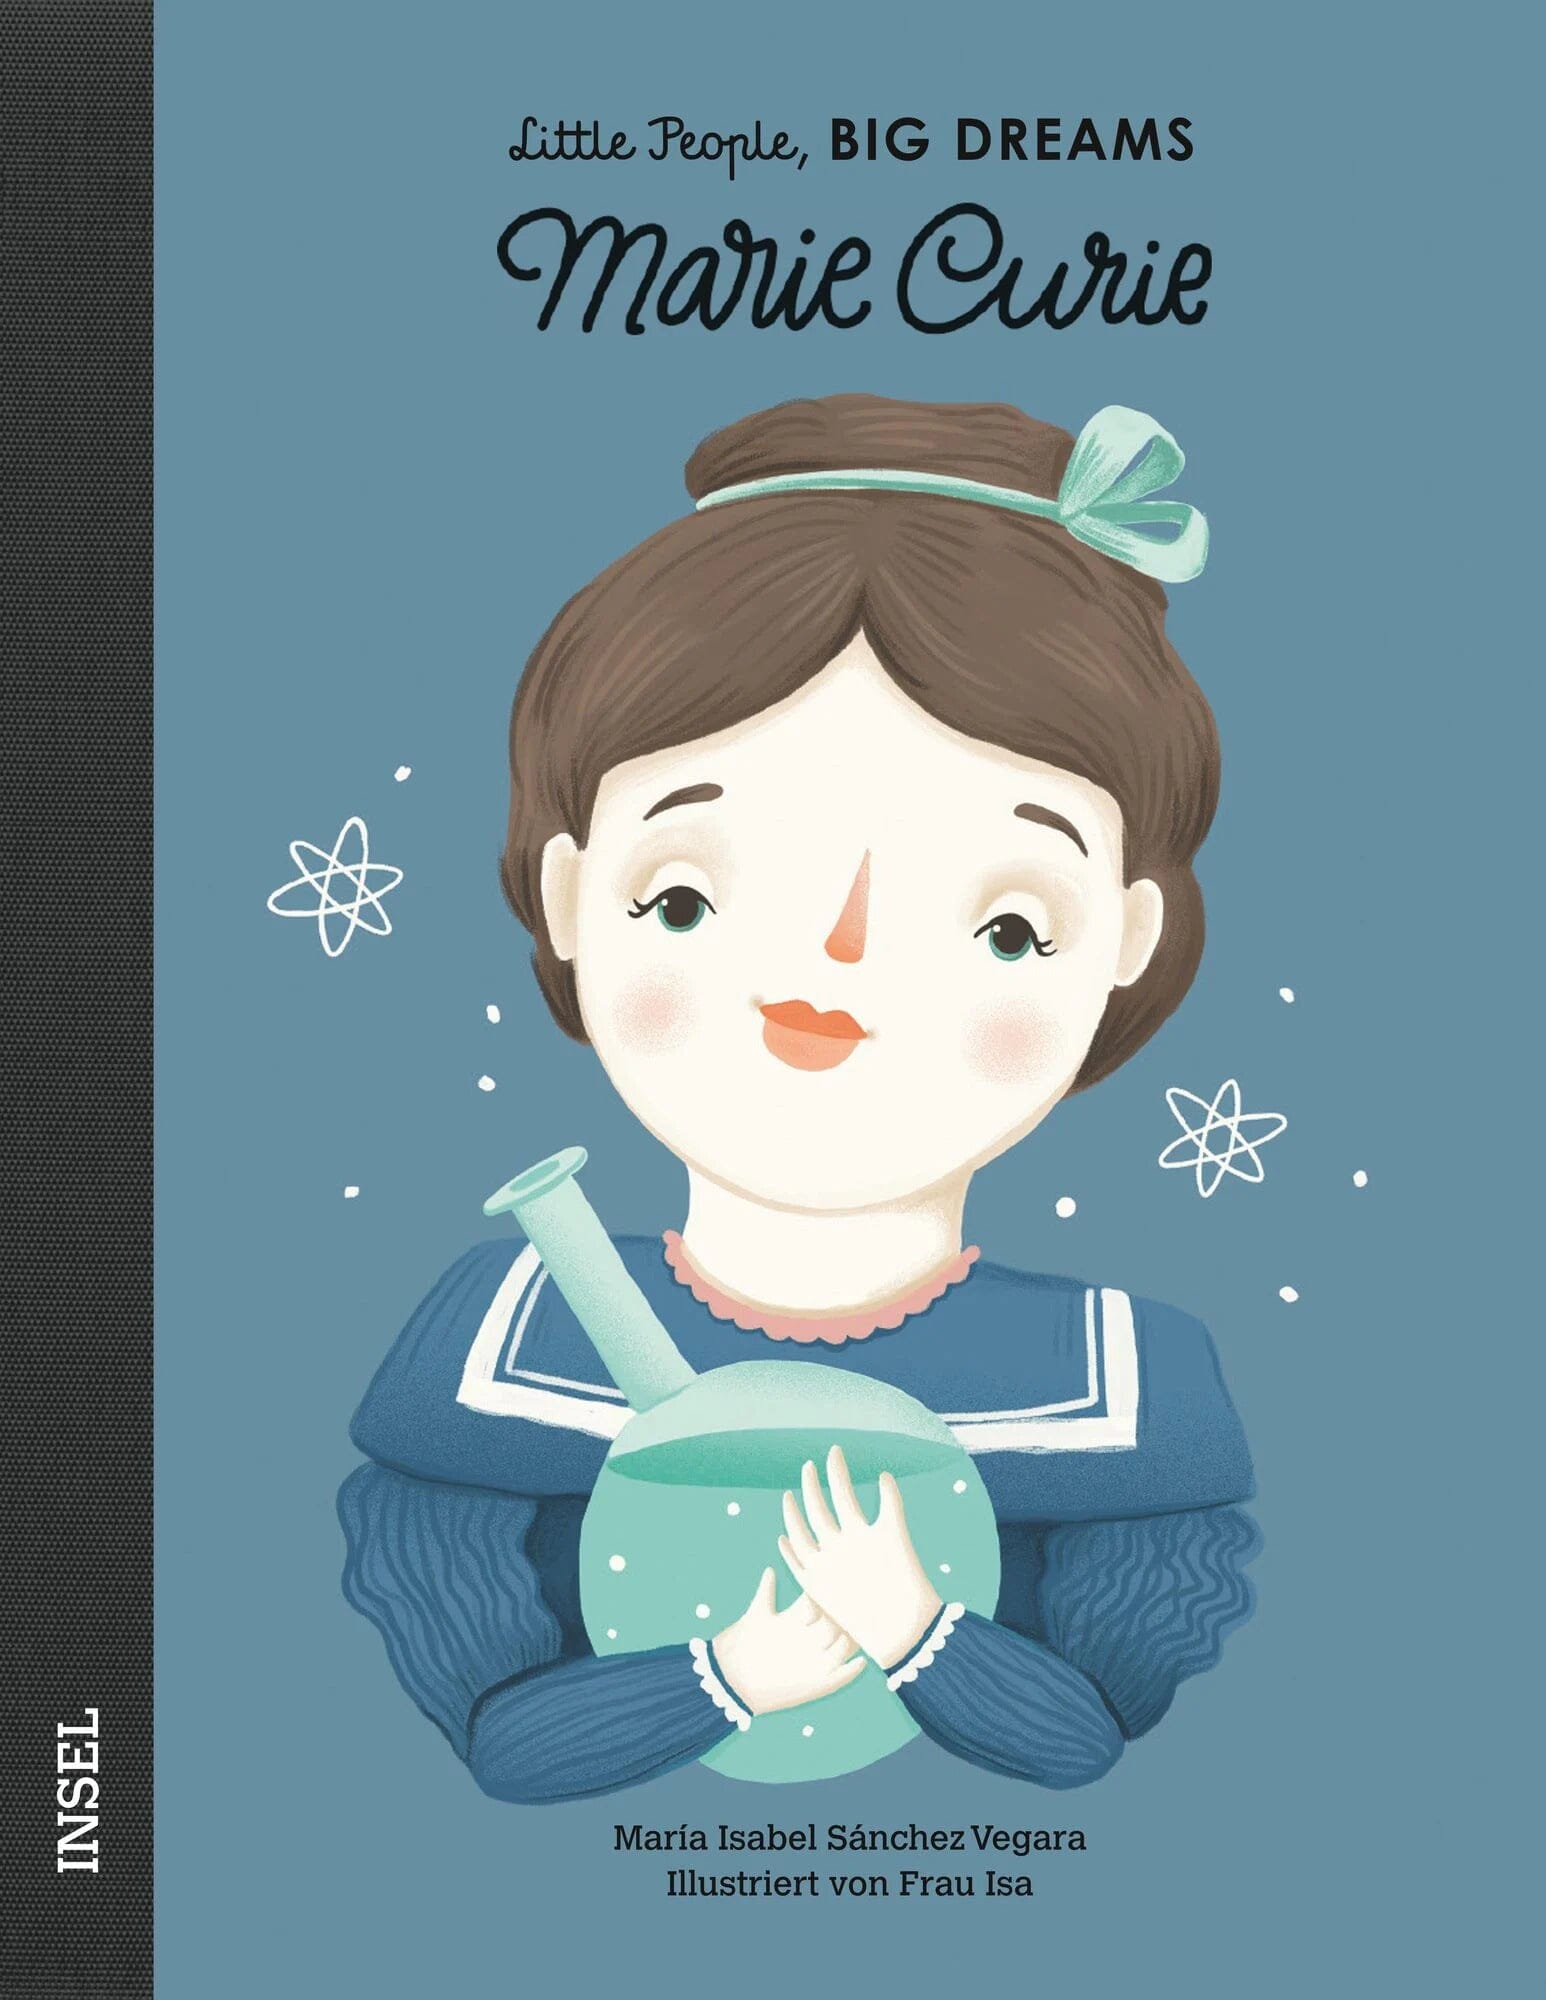 Little People, Big Dreams "Marie Curie" Buch Insel Verlag 